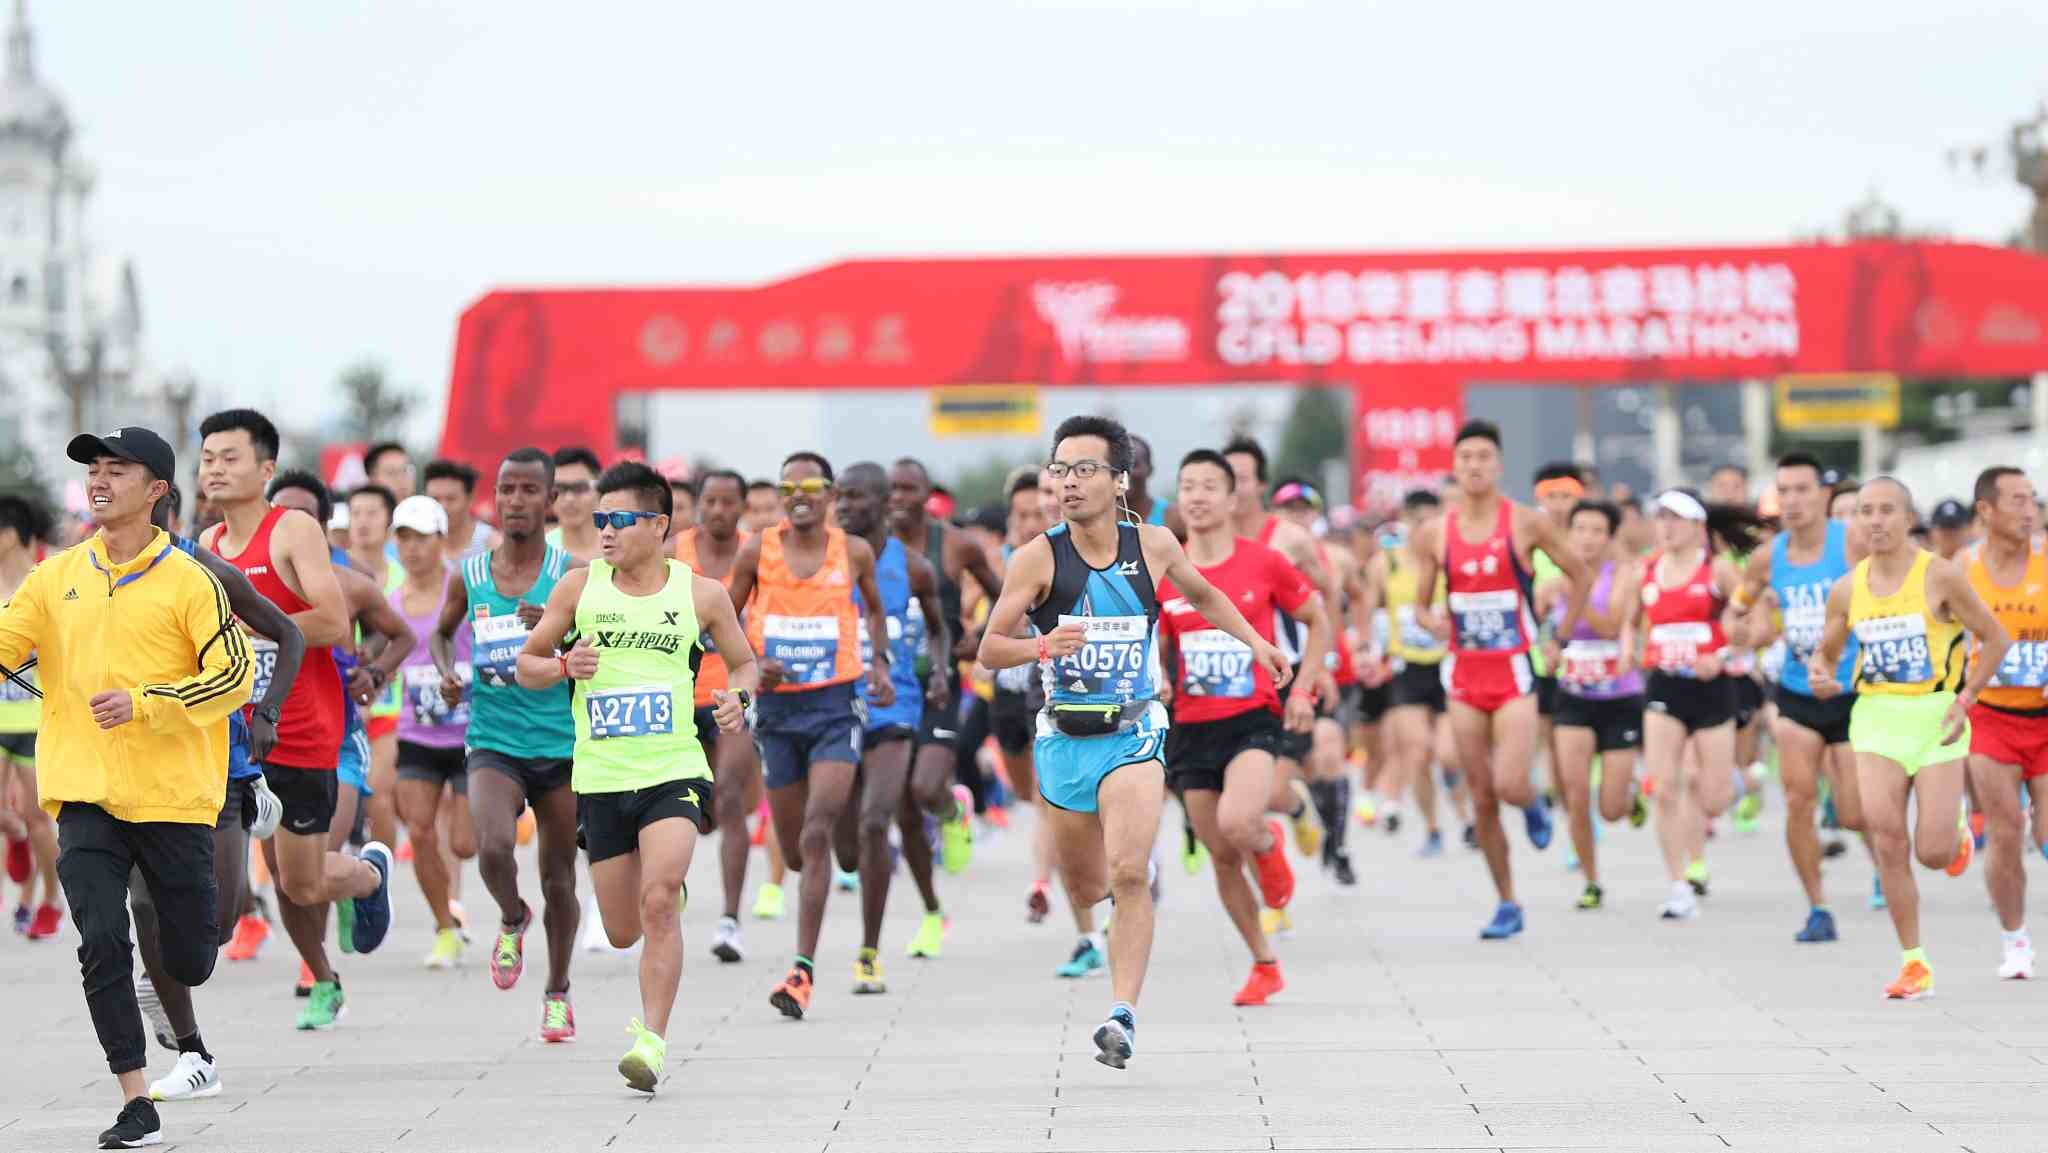 2021 Beijing Marathon cancelled as city experiences Covid spike